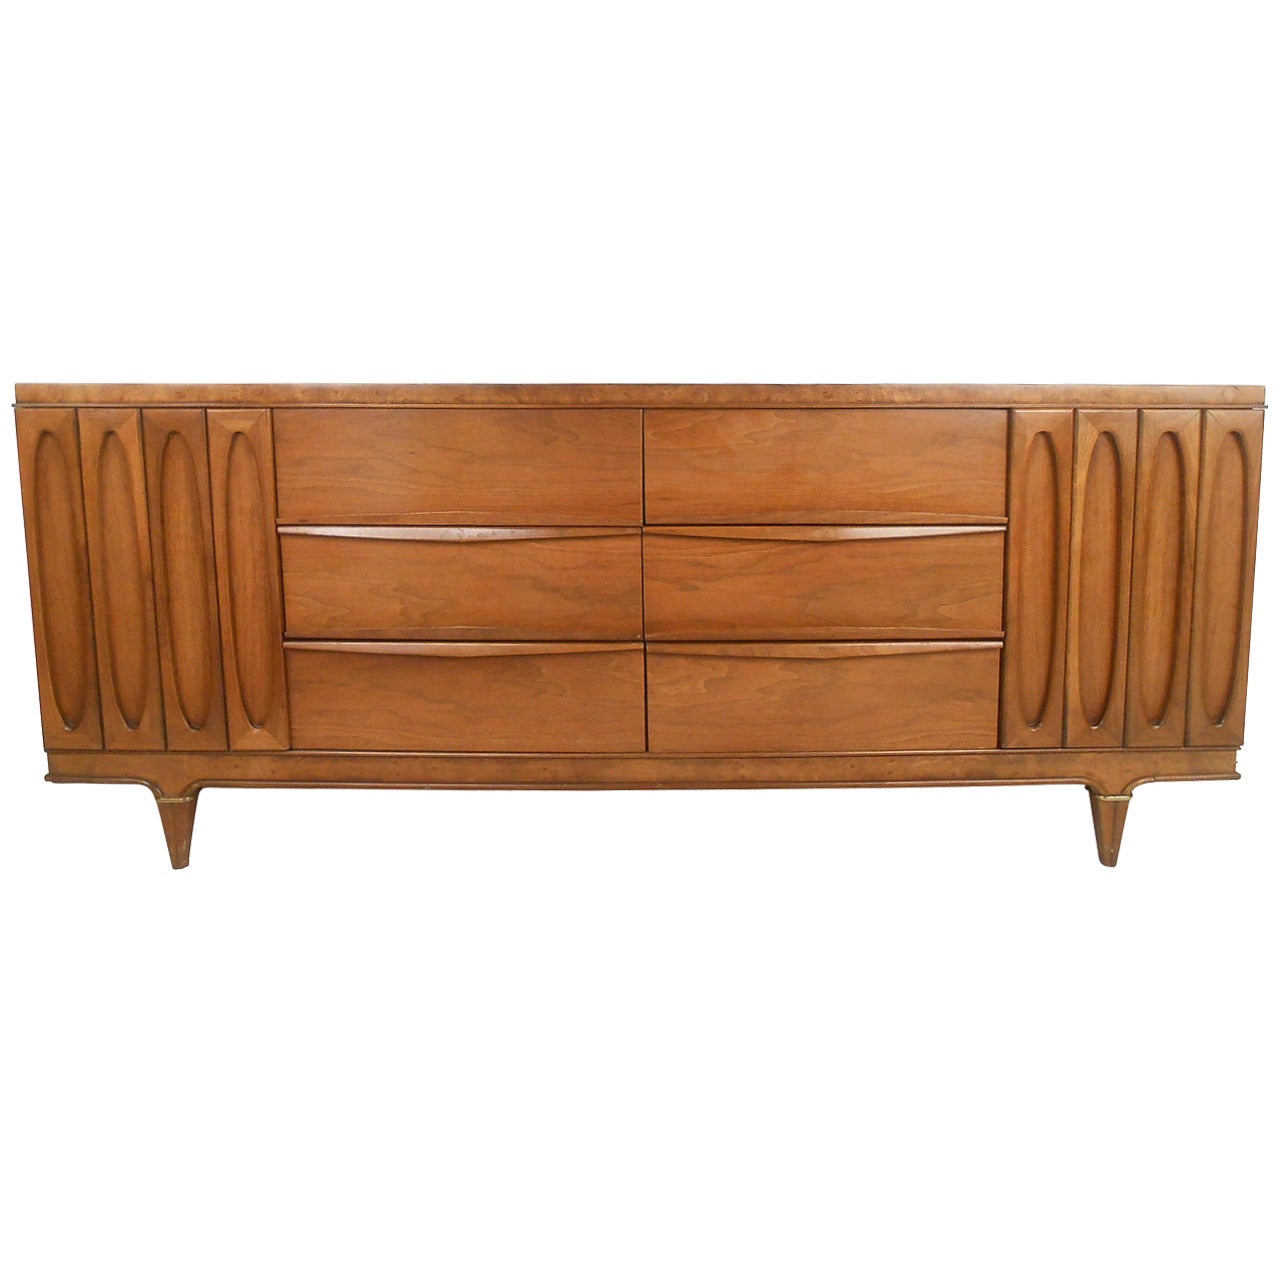 Large Mid-Century Modern Dresser by American of Martinsville